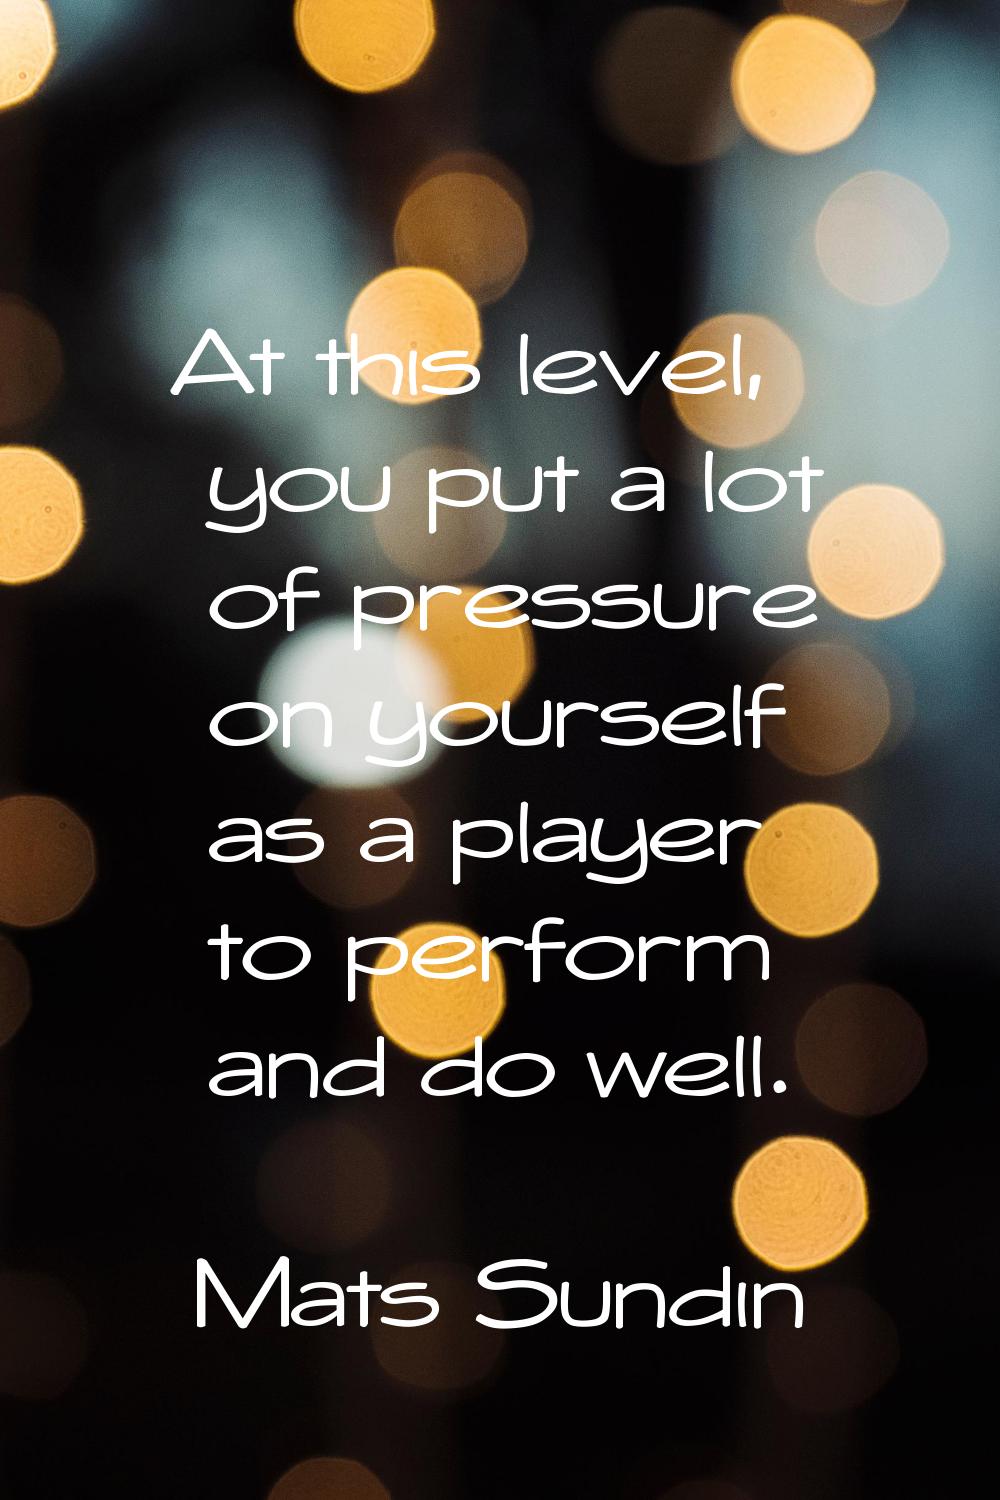 At this level, you put a lot of pressure on yourself as a player to perform and do well.